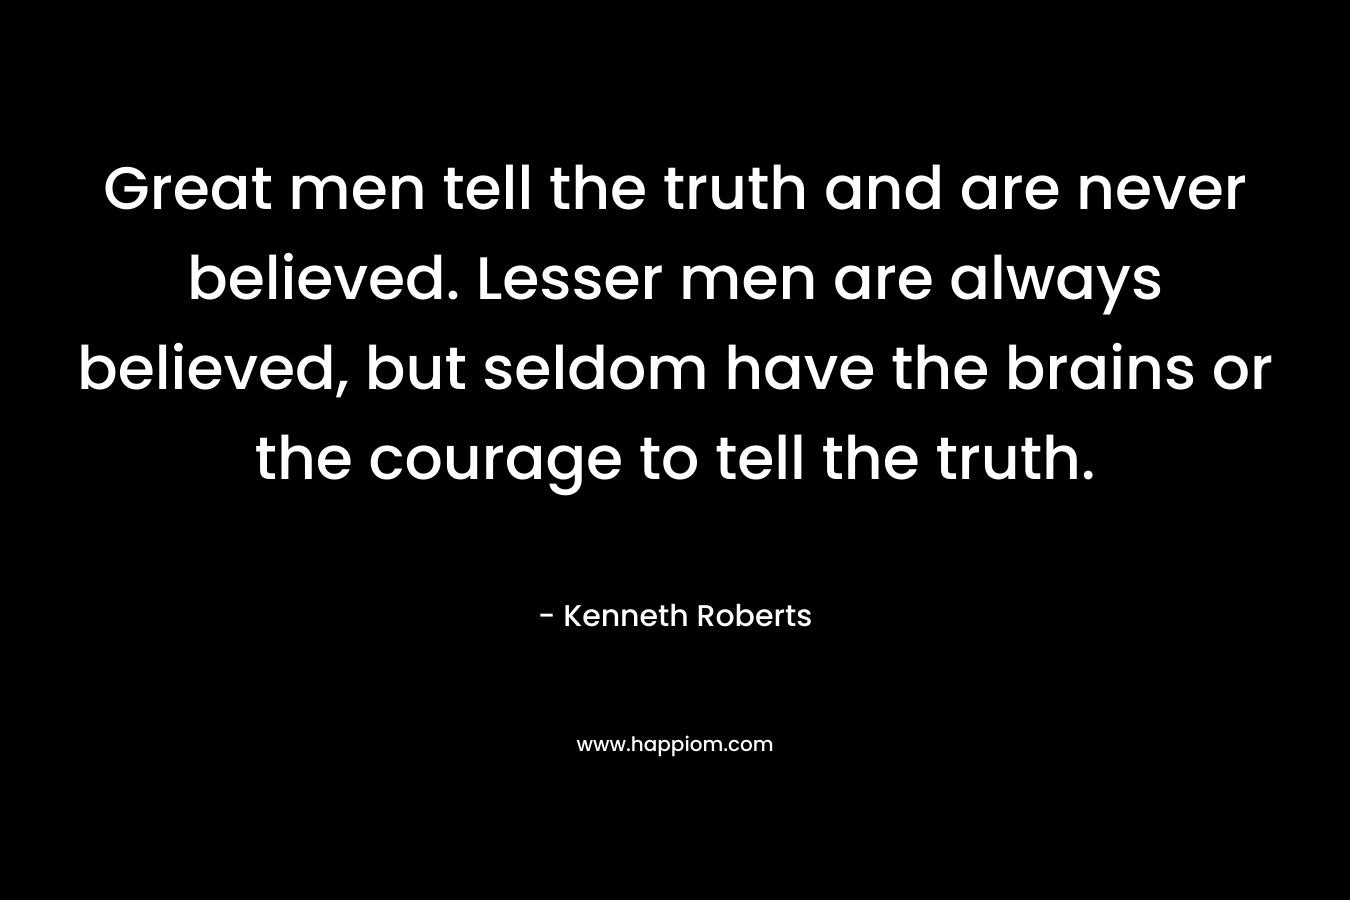 Great men tell the truth and are never believed. Lesser men are always believed, but seldom have the brains or the courage to tell the truth.